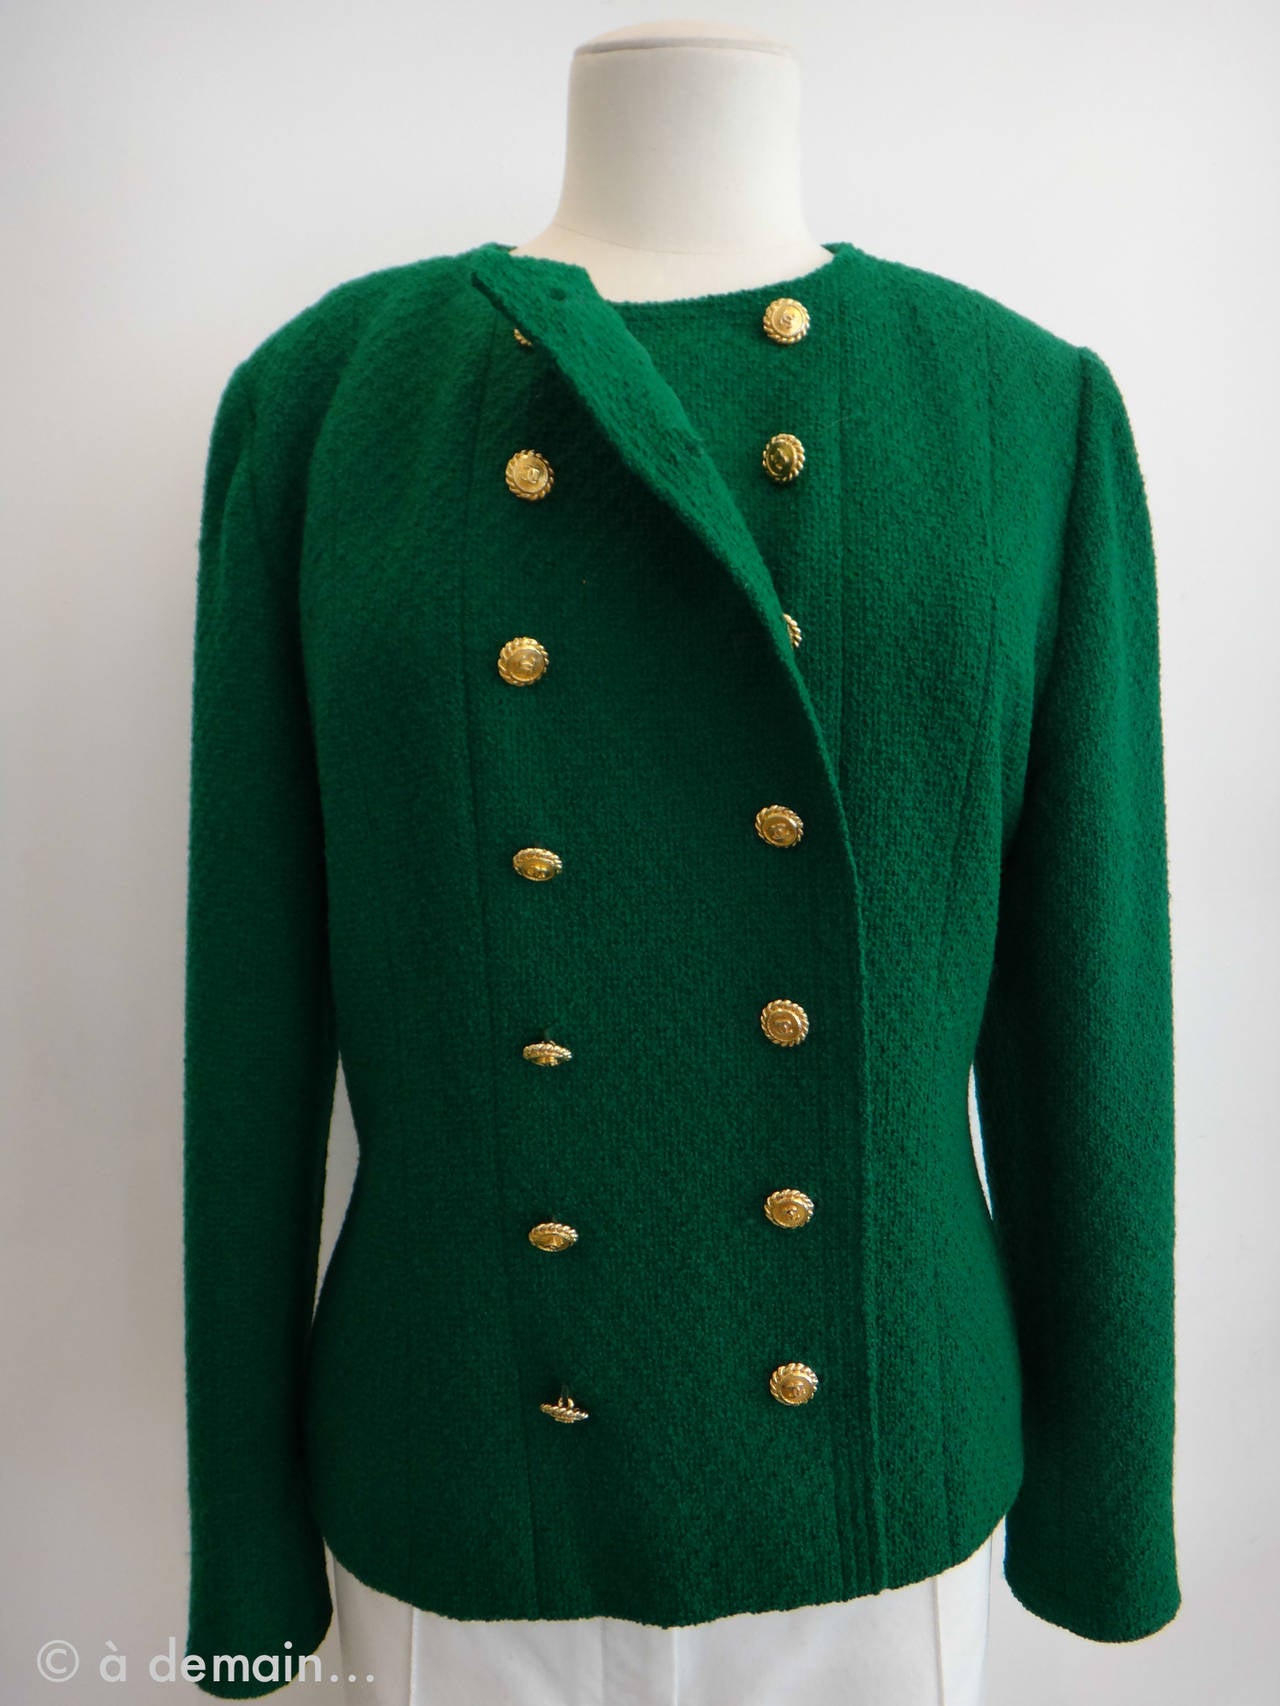 Chanel Boutique Green Jacket with Golden Buttons 1